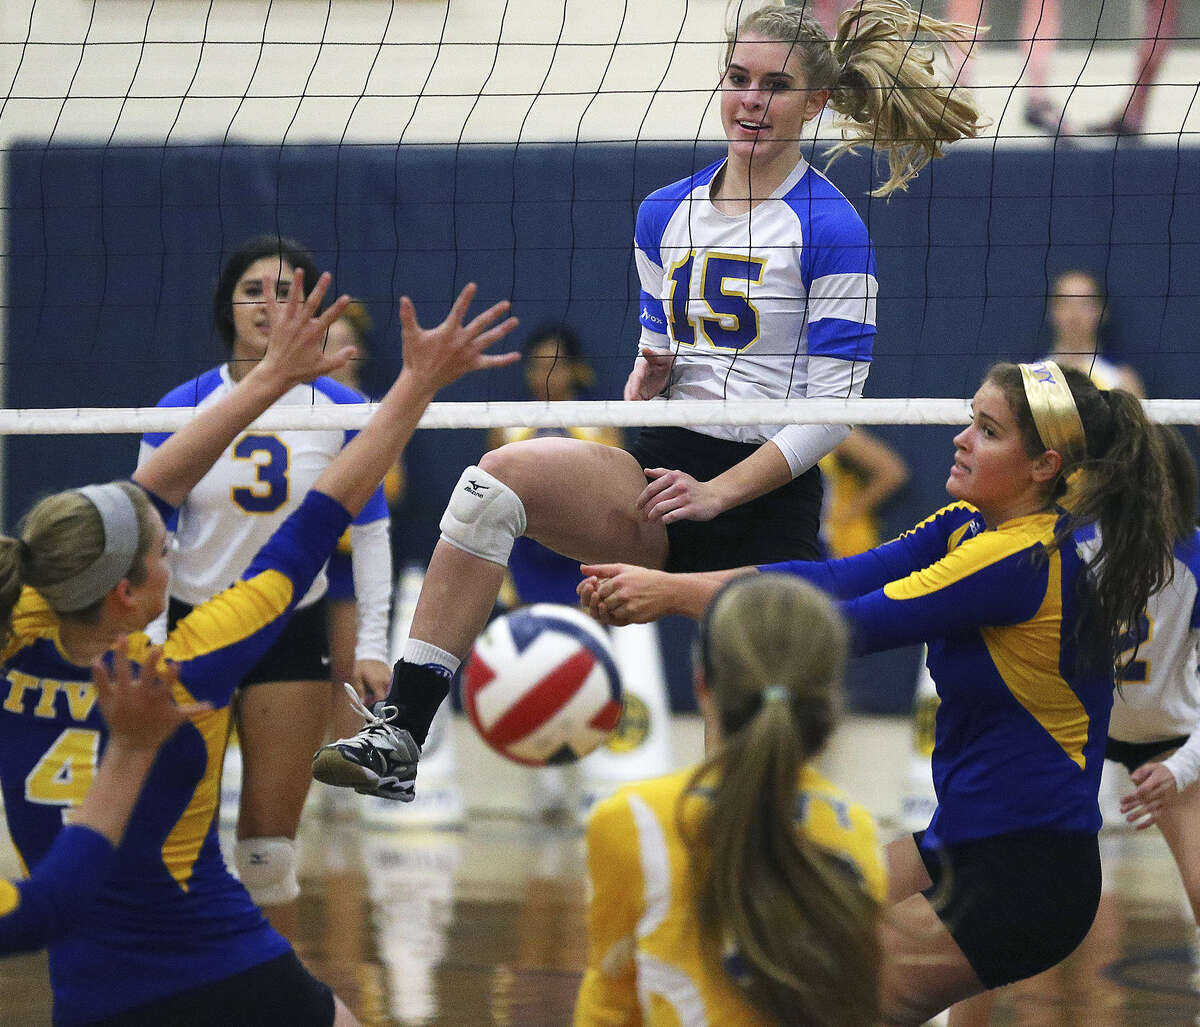 Alamo Heights' McKay Kyle (15) enjoys the scramble she created on the other side of the net with her spike during the Mules' three-set victory over District 27-5A rival Kerrville Tivy.